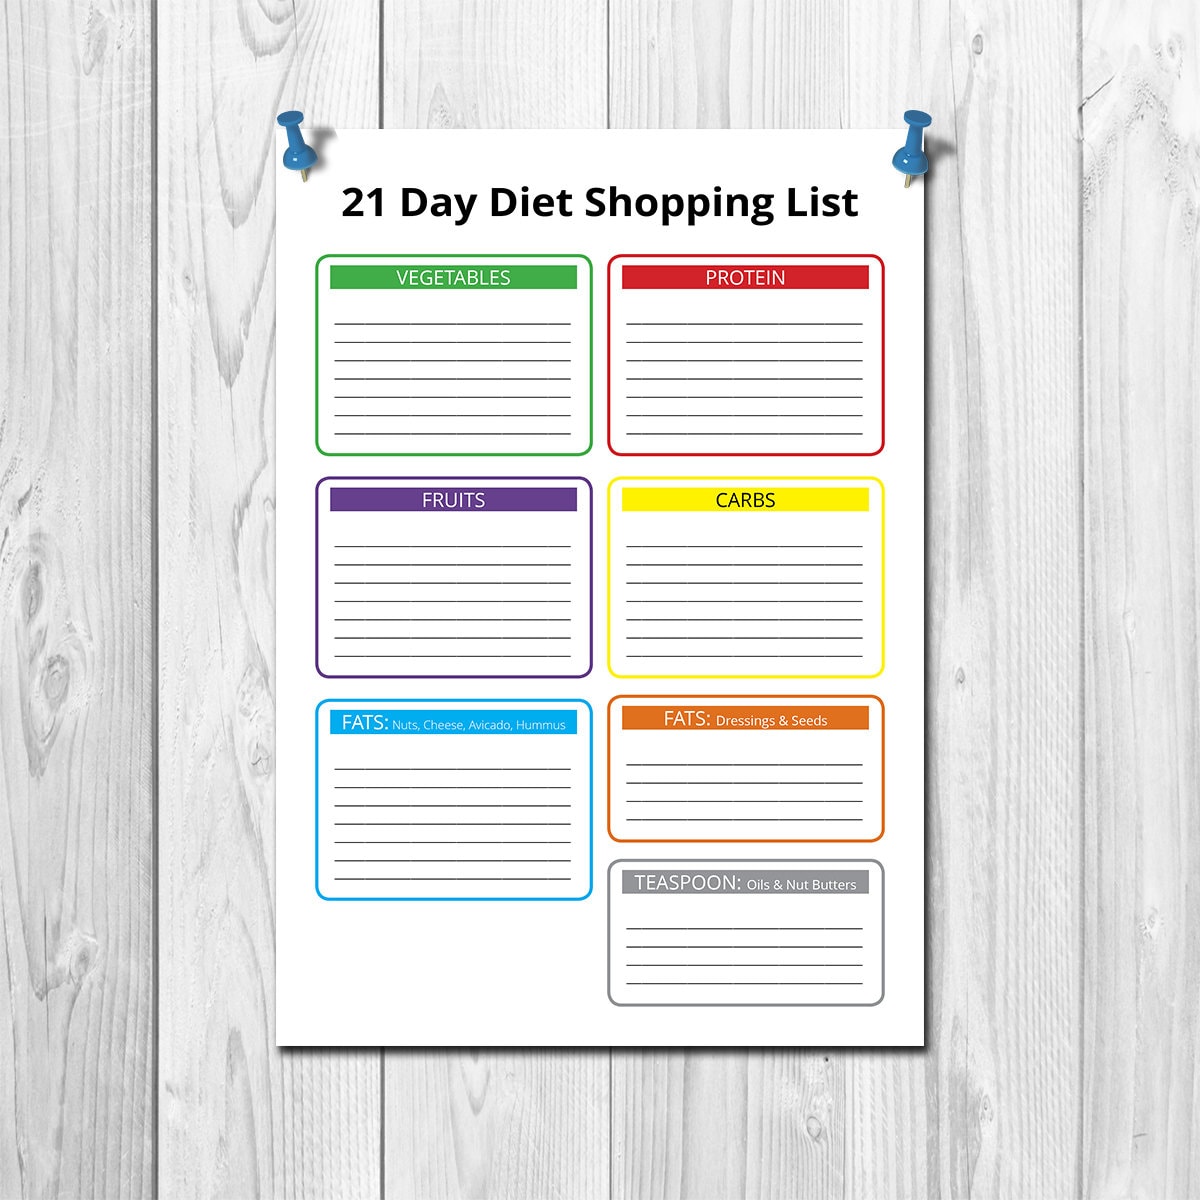 Approved 21 Day Fix Food List for 2023 + Printable